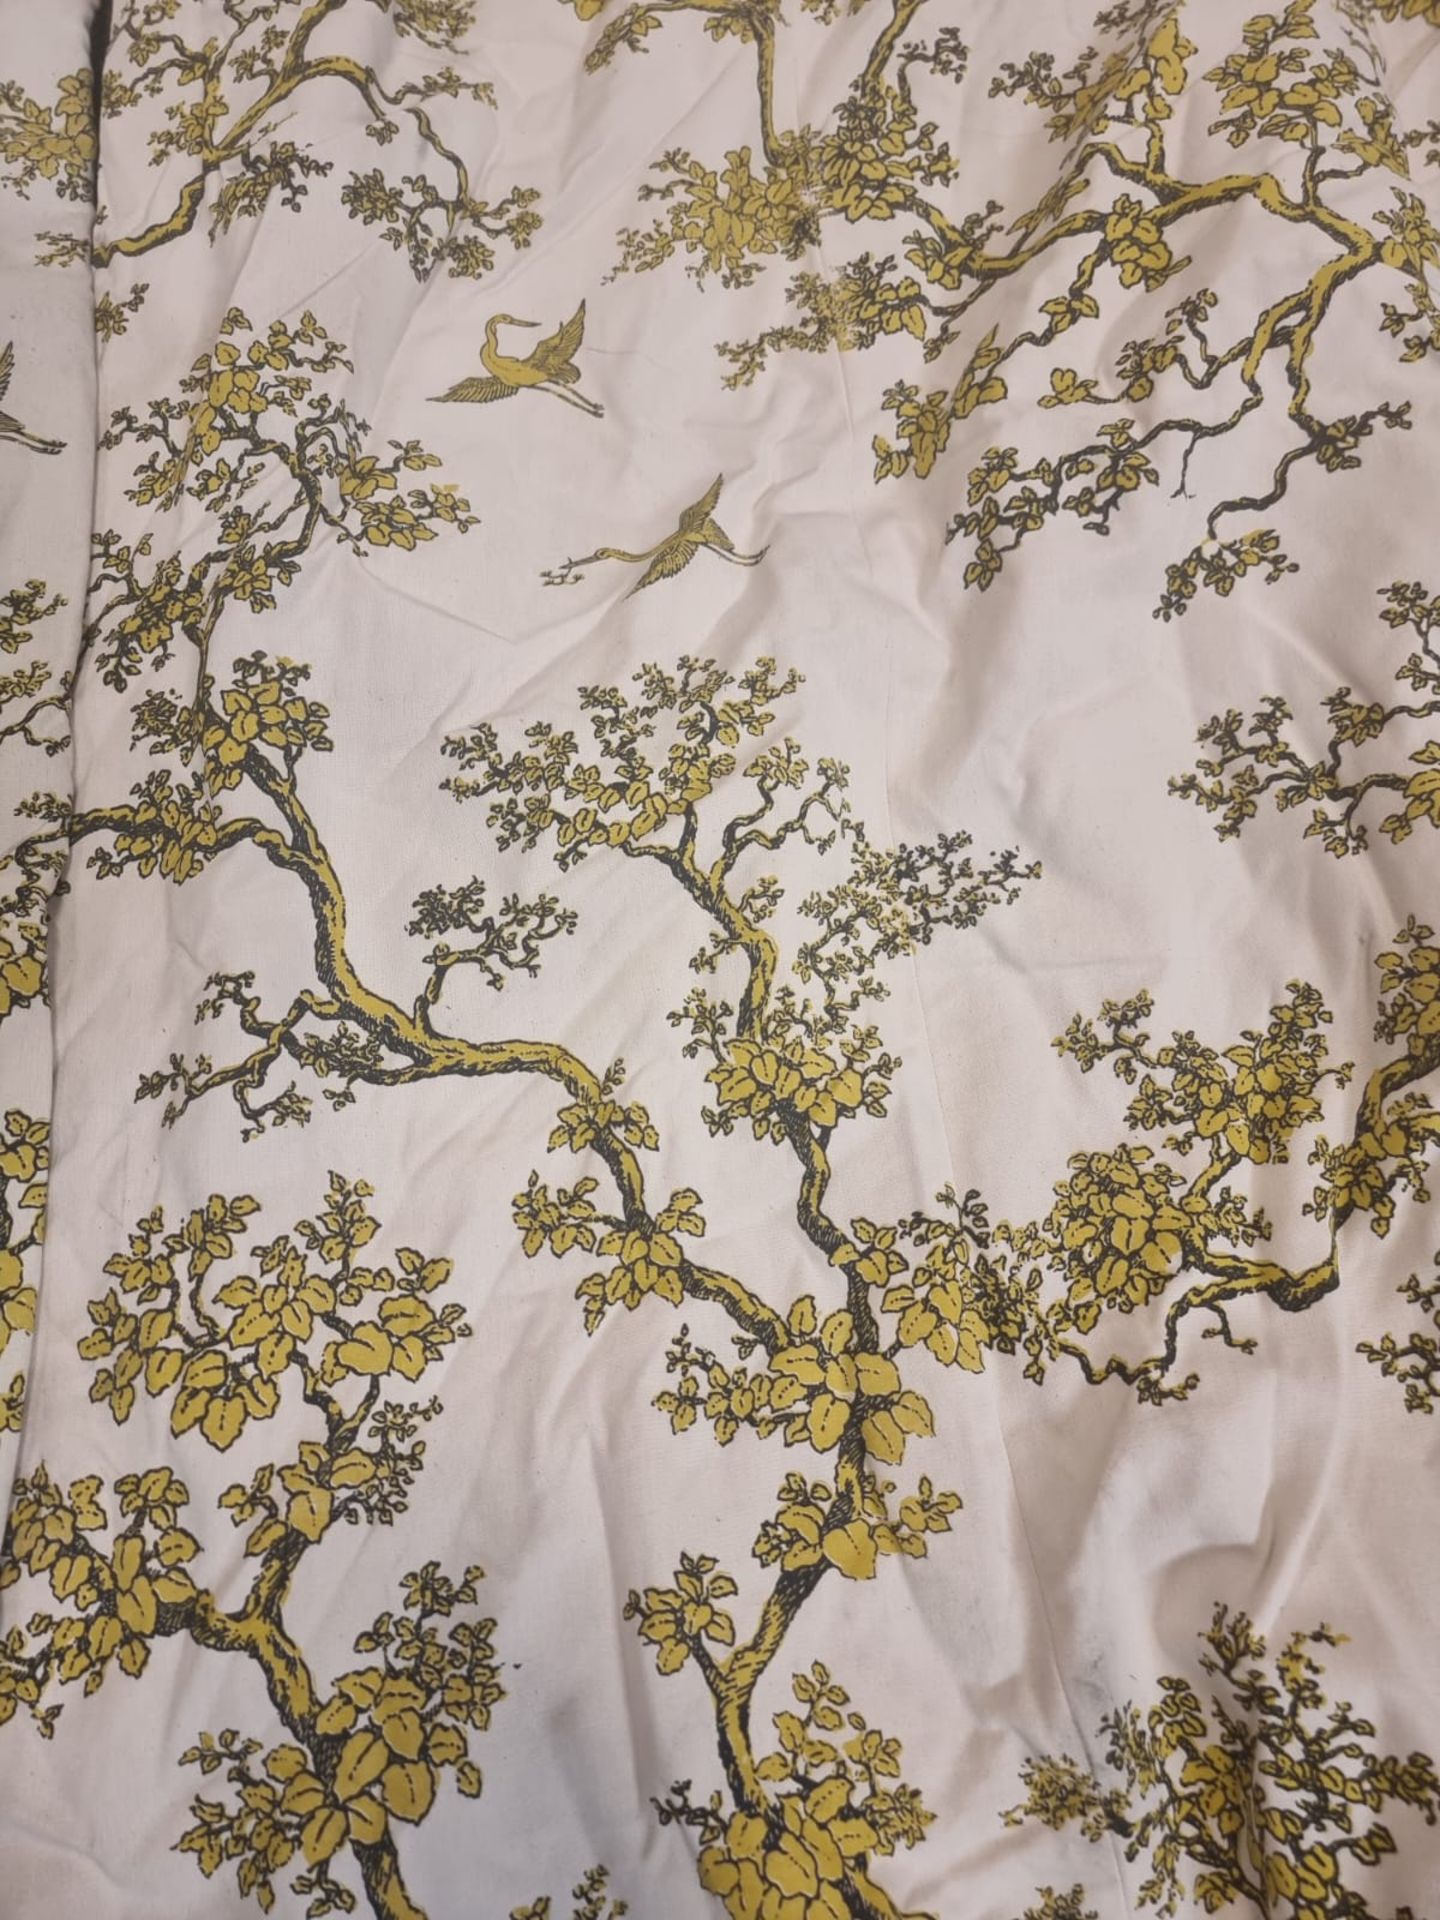 A pair of fully lined luxury cotton drapes in cream with exotic tree and birds repeating pattern - Image 4 of 6